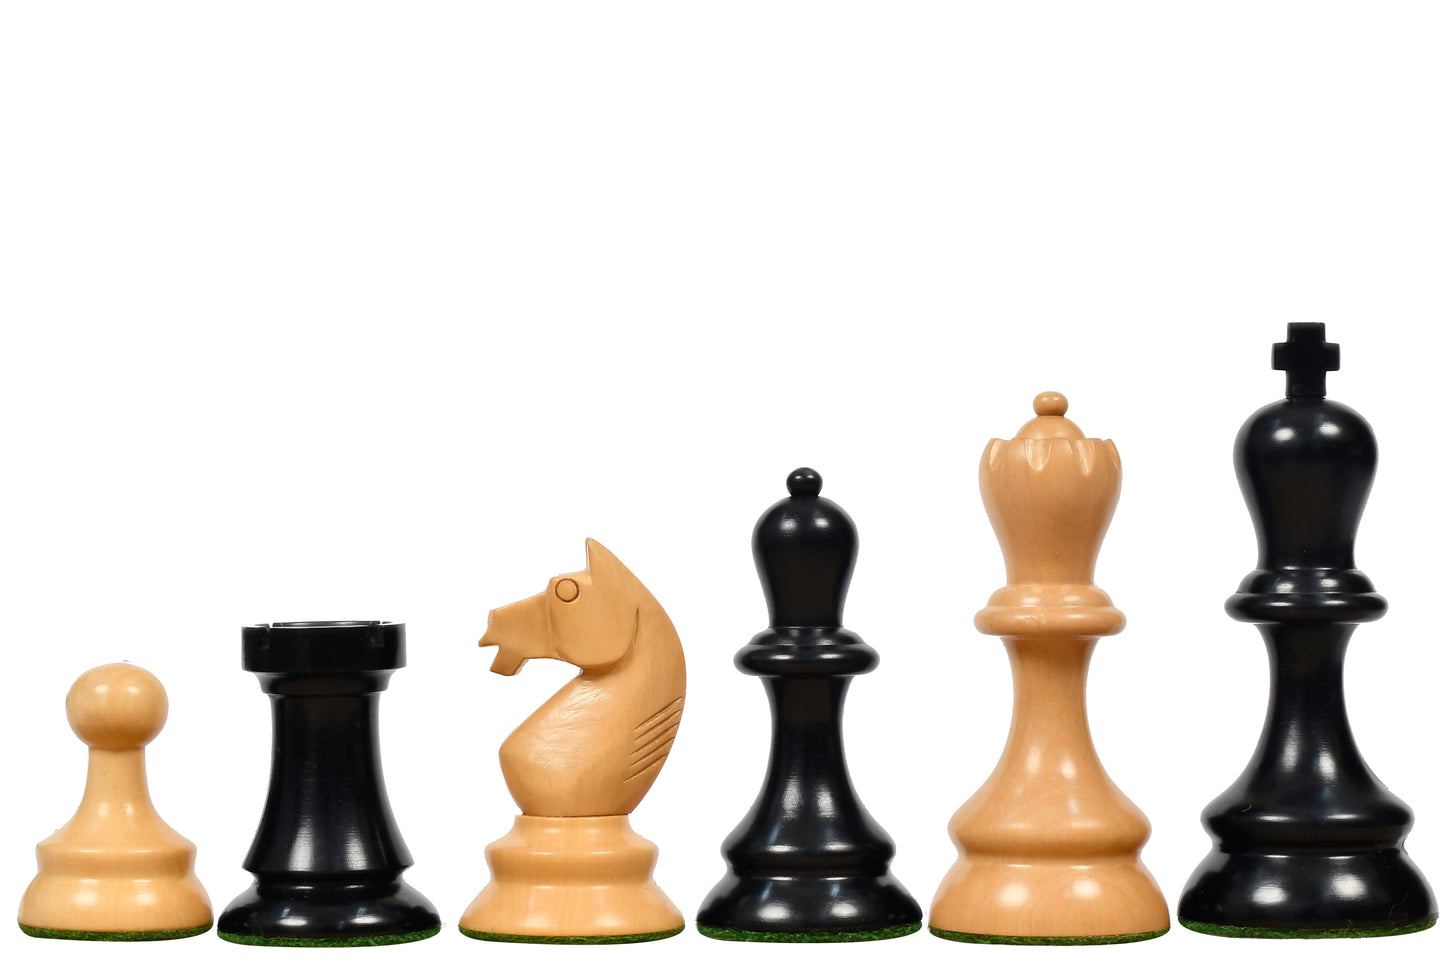 The 1937 7th Stockholm Olympiad Reproduced Chess Pieces in Ebonized & Box Wood - 3.75" King